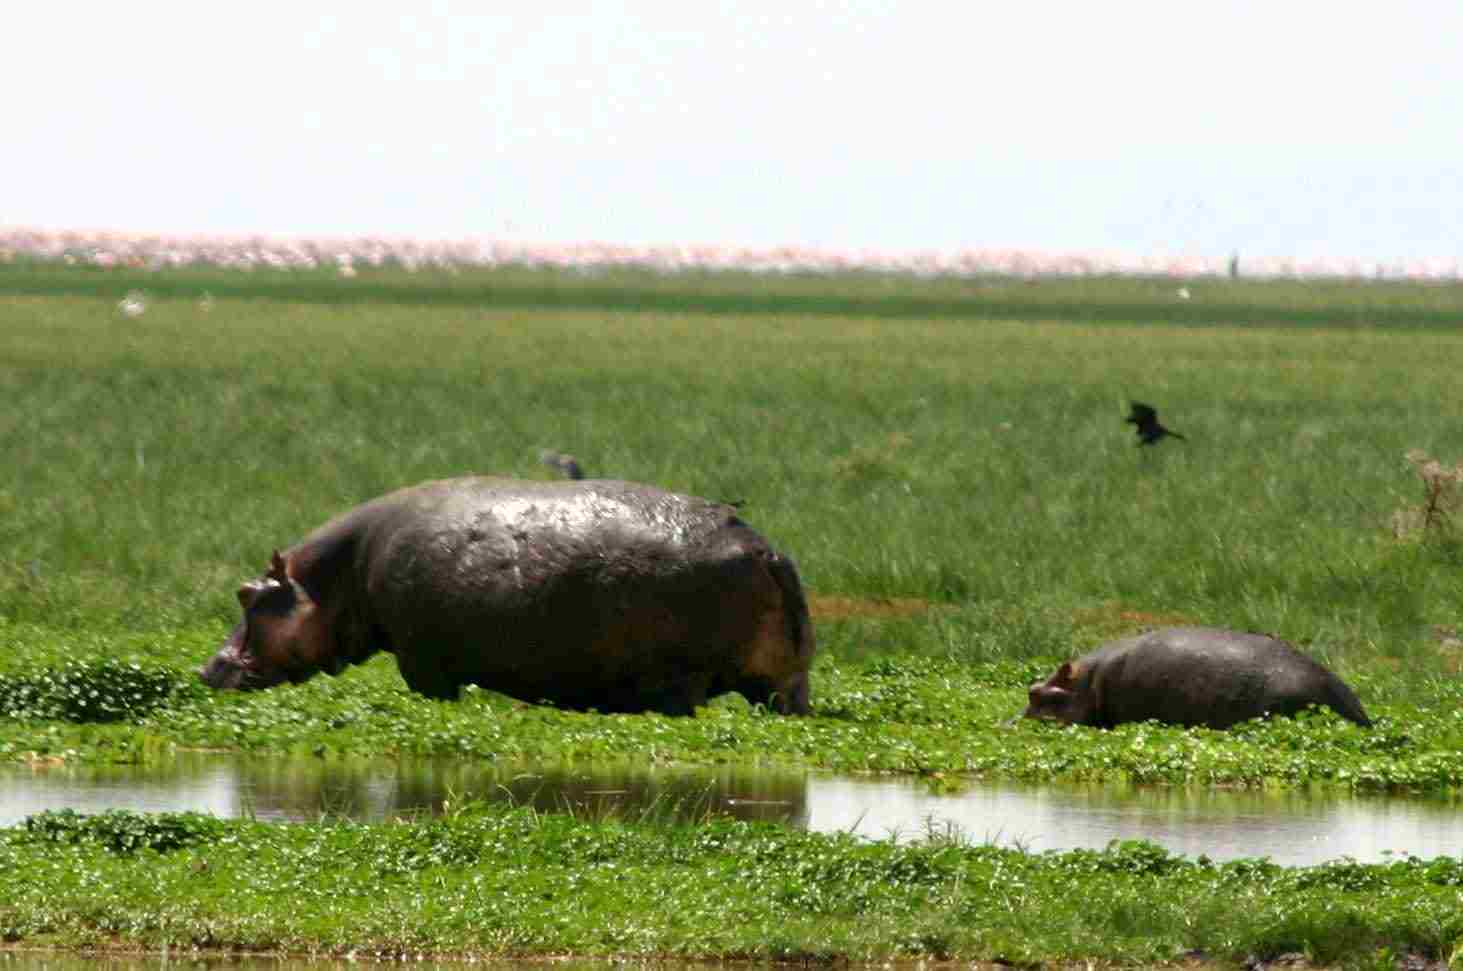 What do Hippos Eat in the Wild: Although Hippos May Kill Their Young, They Rarely Eat Them (Credit: Charles J. Sharp 2004 .CC BY-SA 3.0.)